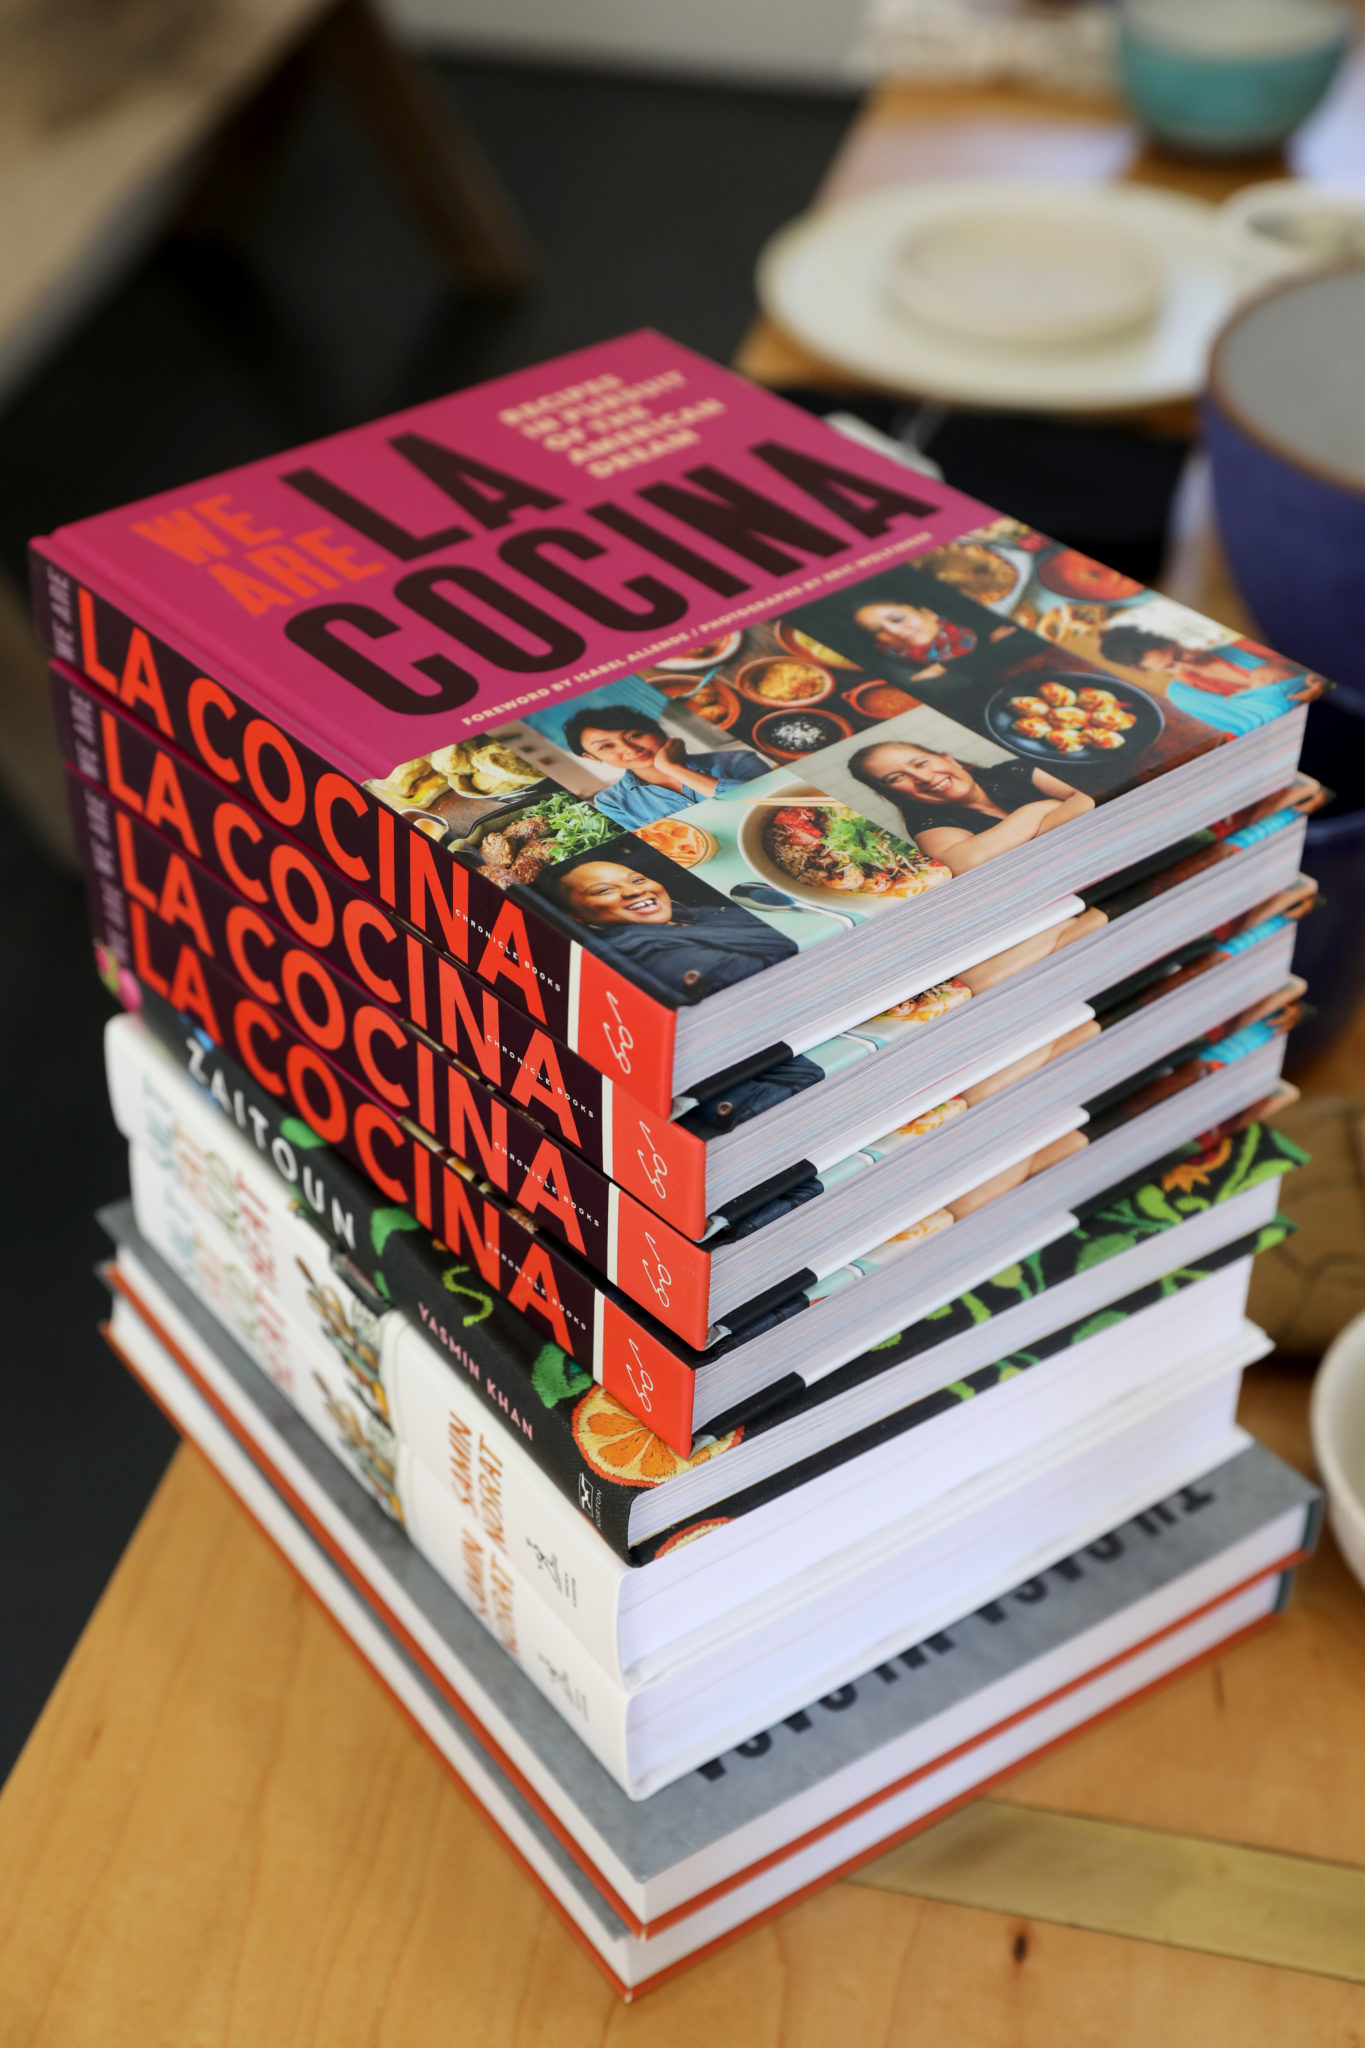 A stack of cookbooks chosen by Sallie Miller and Gwen Gunheim, the owners of Miracle Plum, for their Miracle Plum Cookbook Club. Photo taken in their shop on Davis St. in Santa Rosa on Wednesday, July 10, 2019. (BETH SCHLANKER/ The Press Democrat)